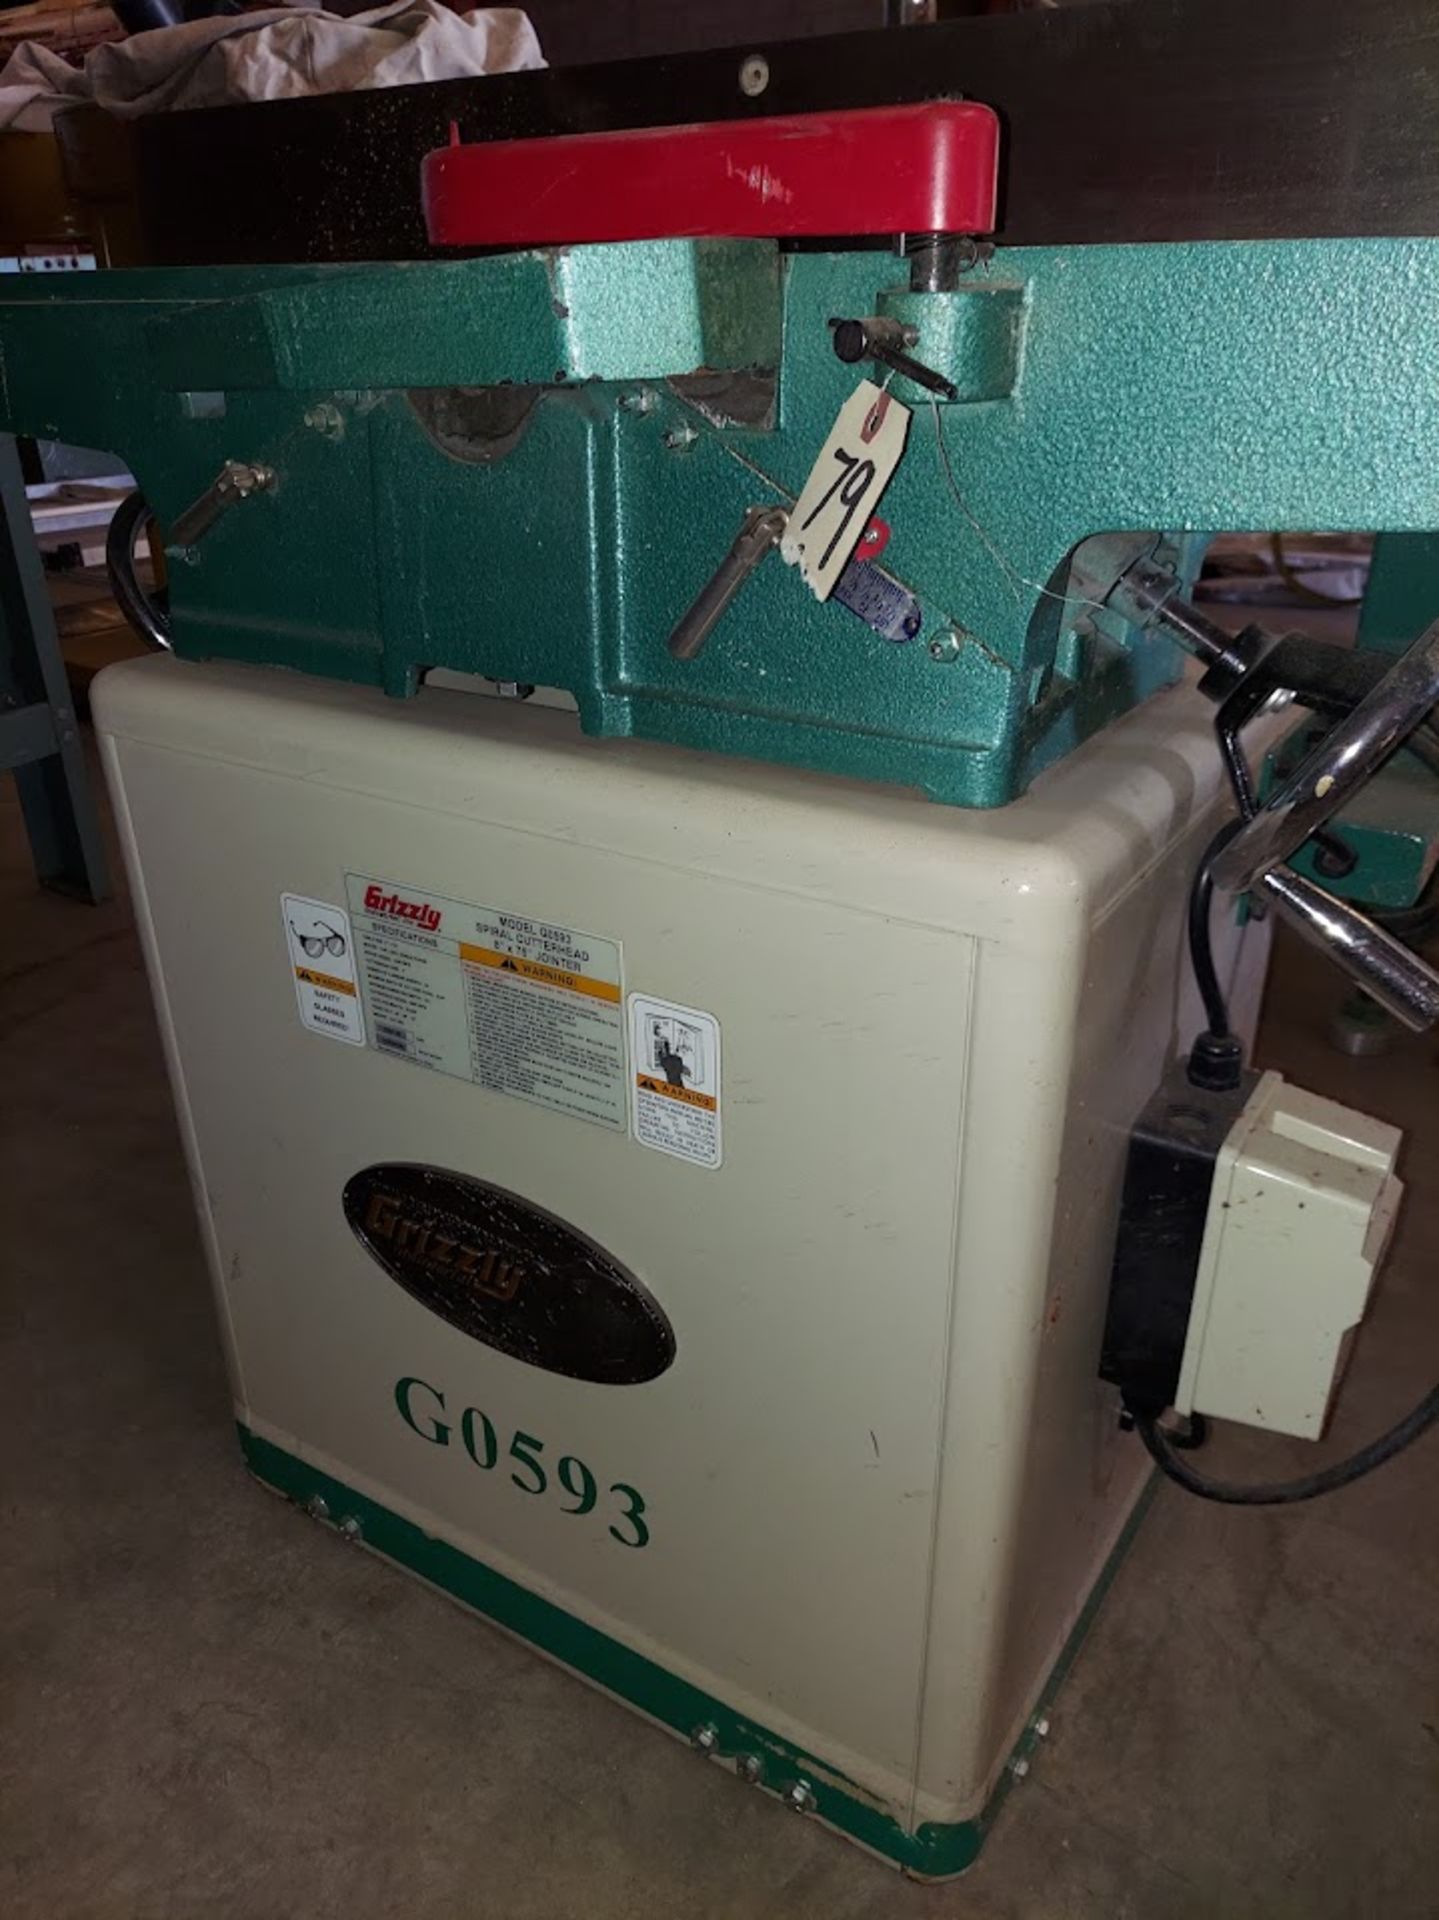 Grizzly 8" Wood Jointer, Model #G0593, Spiral Cutter Head, Motor is 2 HP 110/220 Volt 1ph - Image 3 of 5